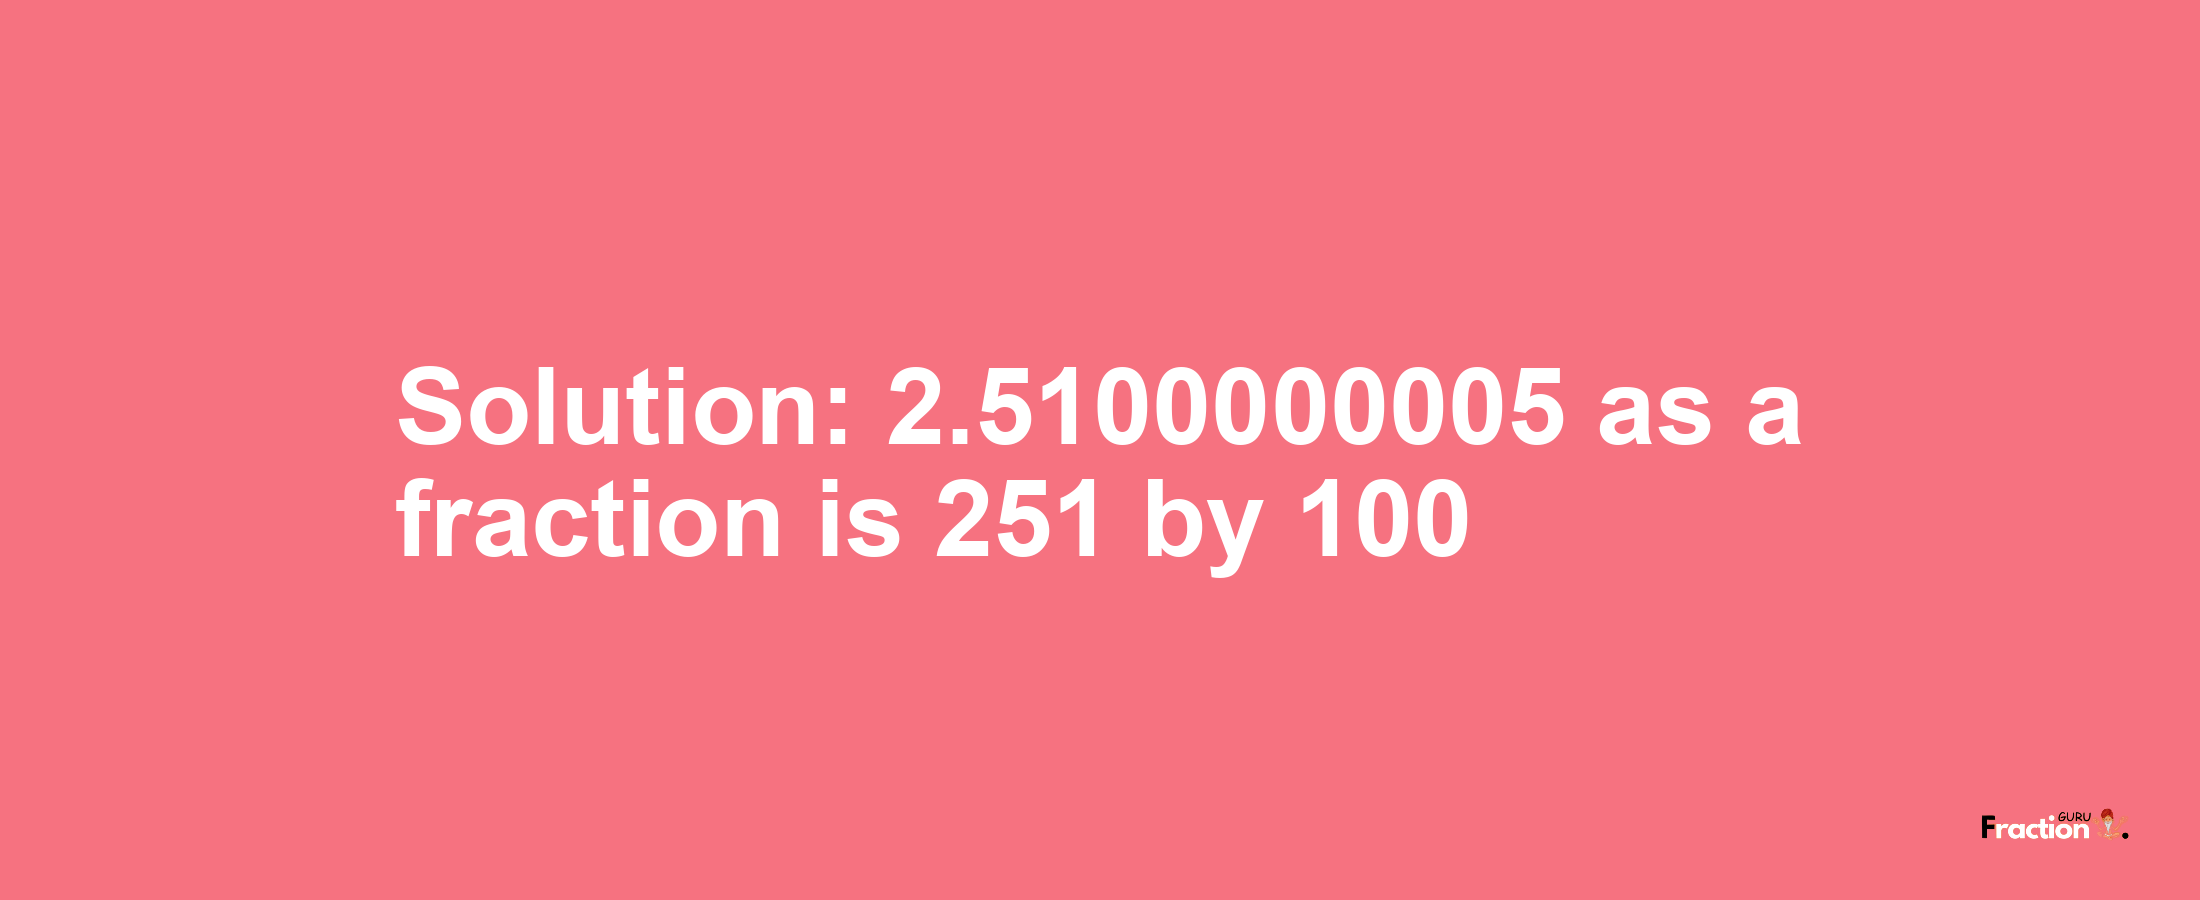 Solution:2.5100000005 as a fraction is 251/100